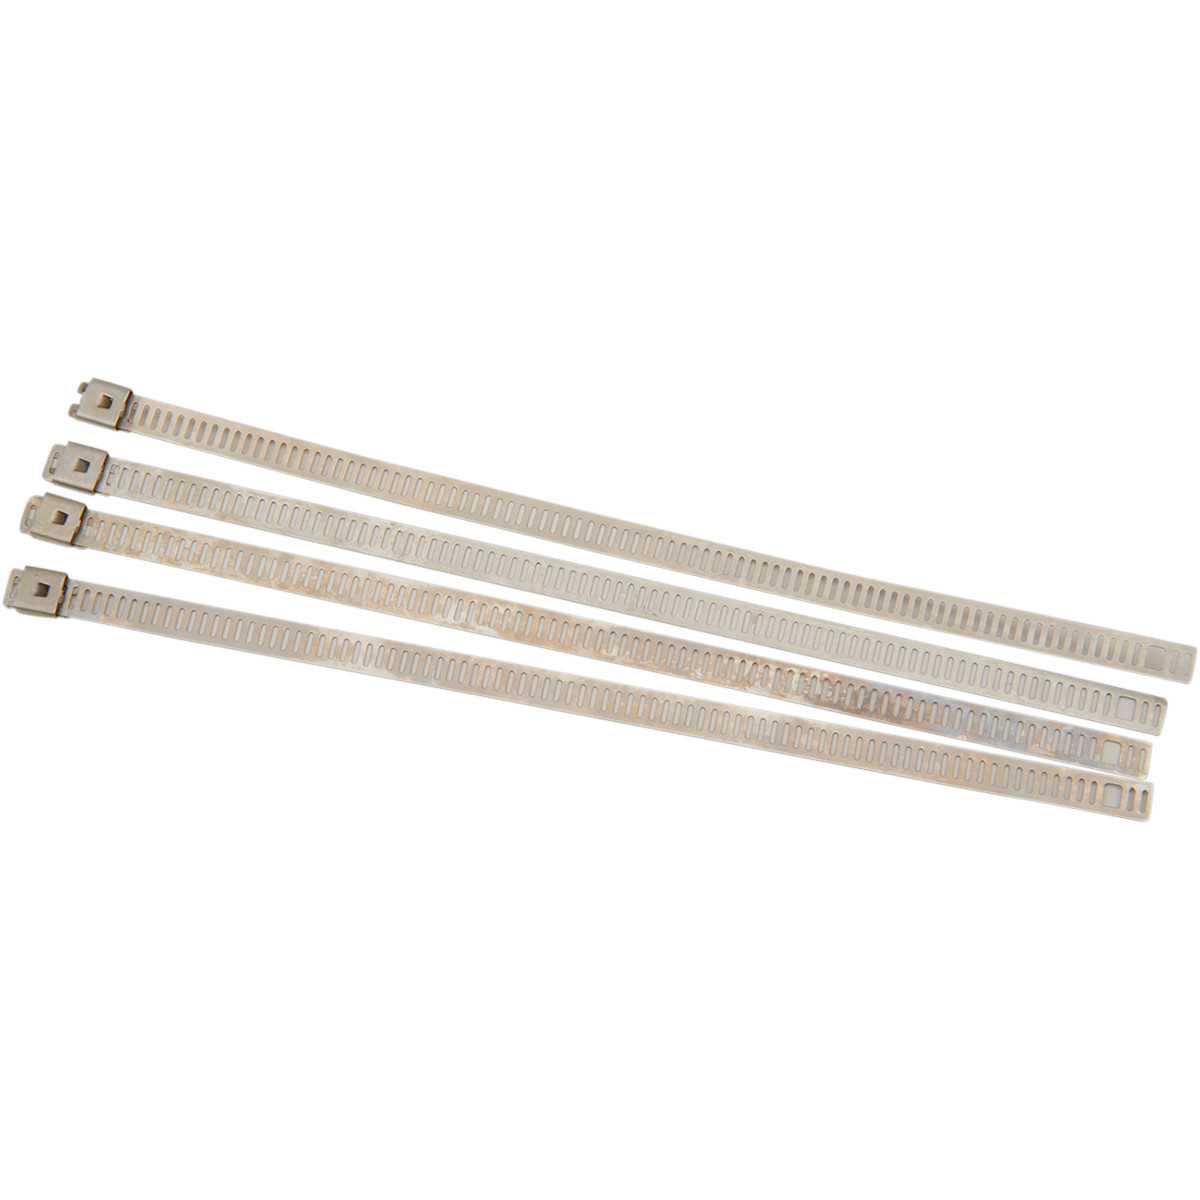 H/D CYCLE STAINLESS STEEL TIE WRAPS STANDARD WIDTH LADDER STYLE (0,275"W),4-PK